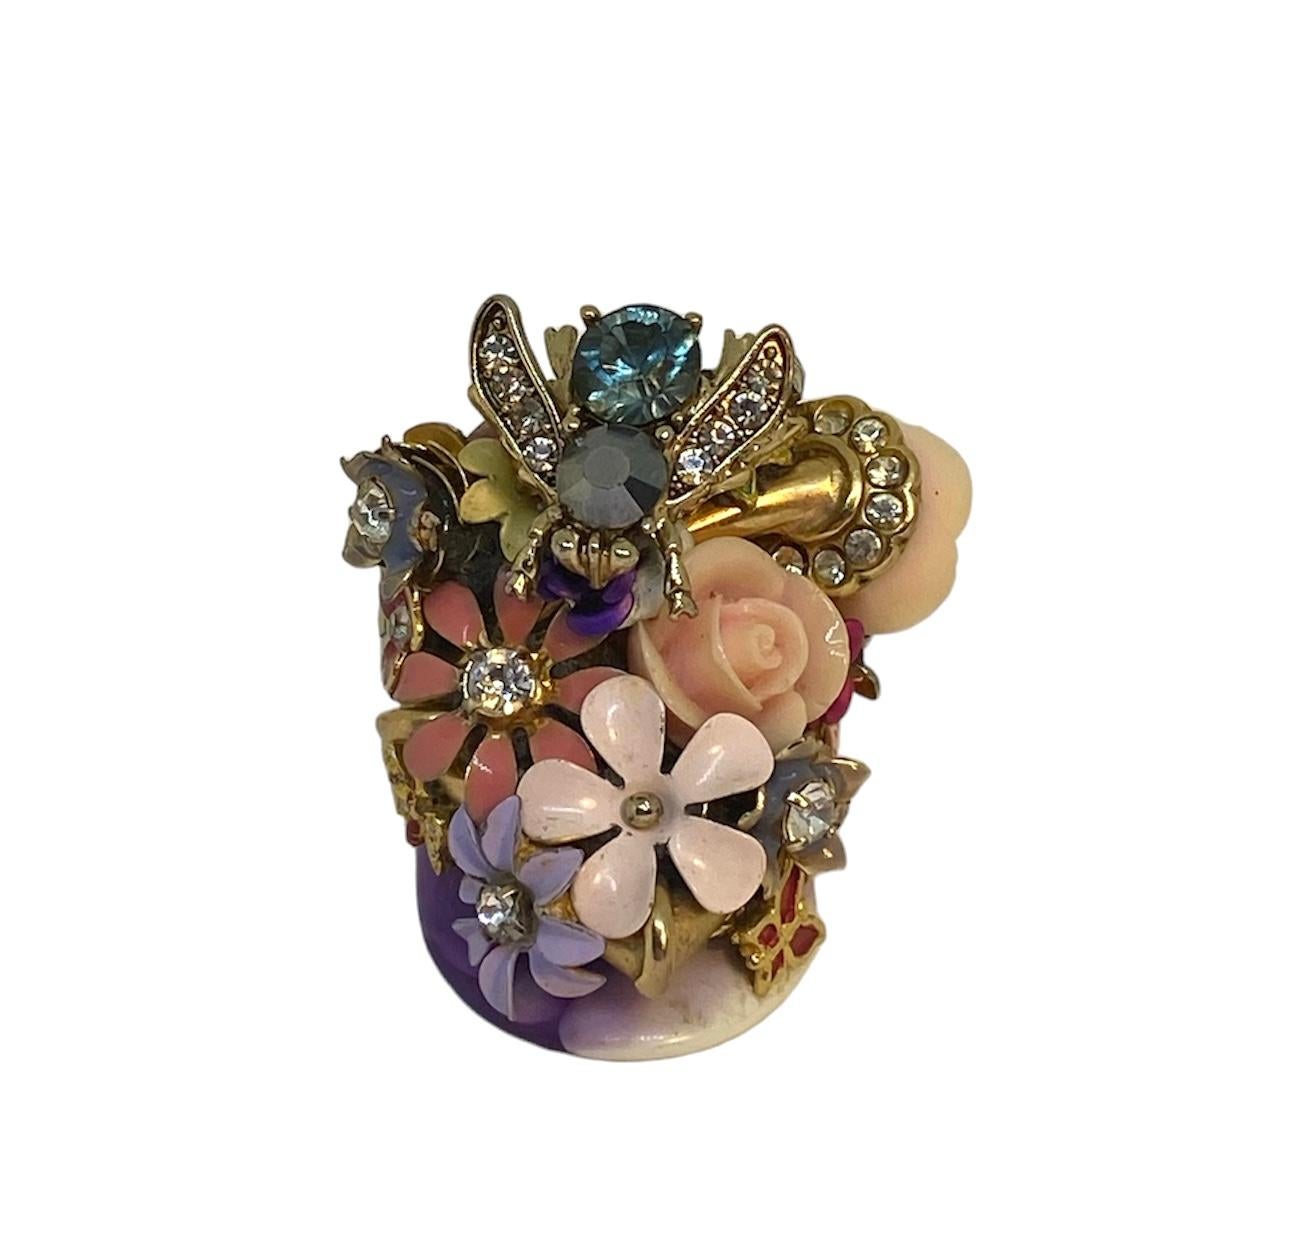 Artisan One Off Ring. Handmade & High Upcycling. Bronze, Resin & Vintage Elements. 20mm. For Sale